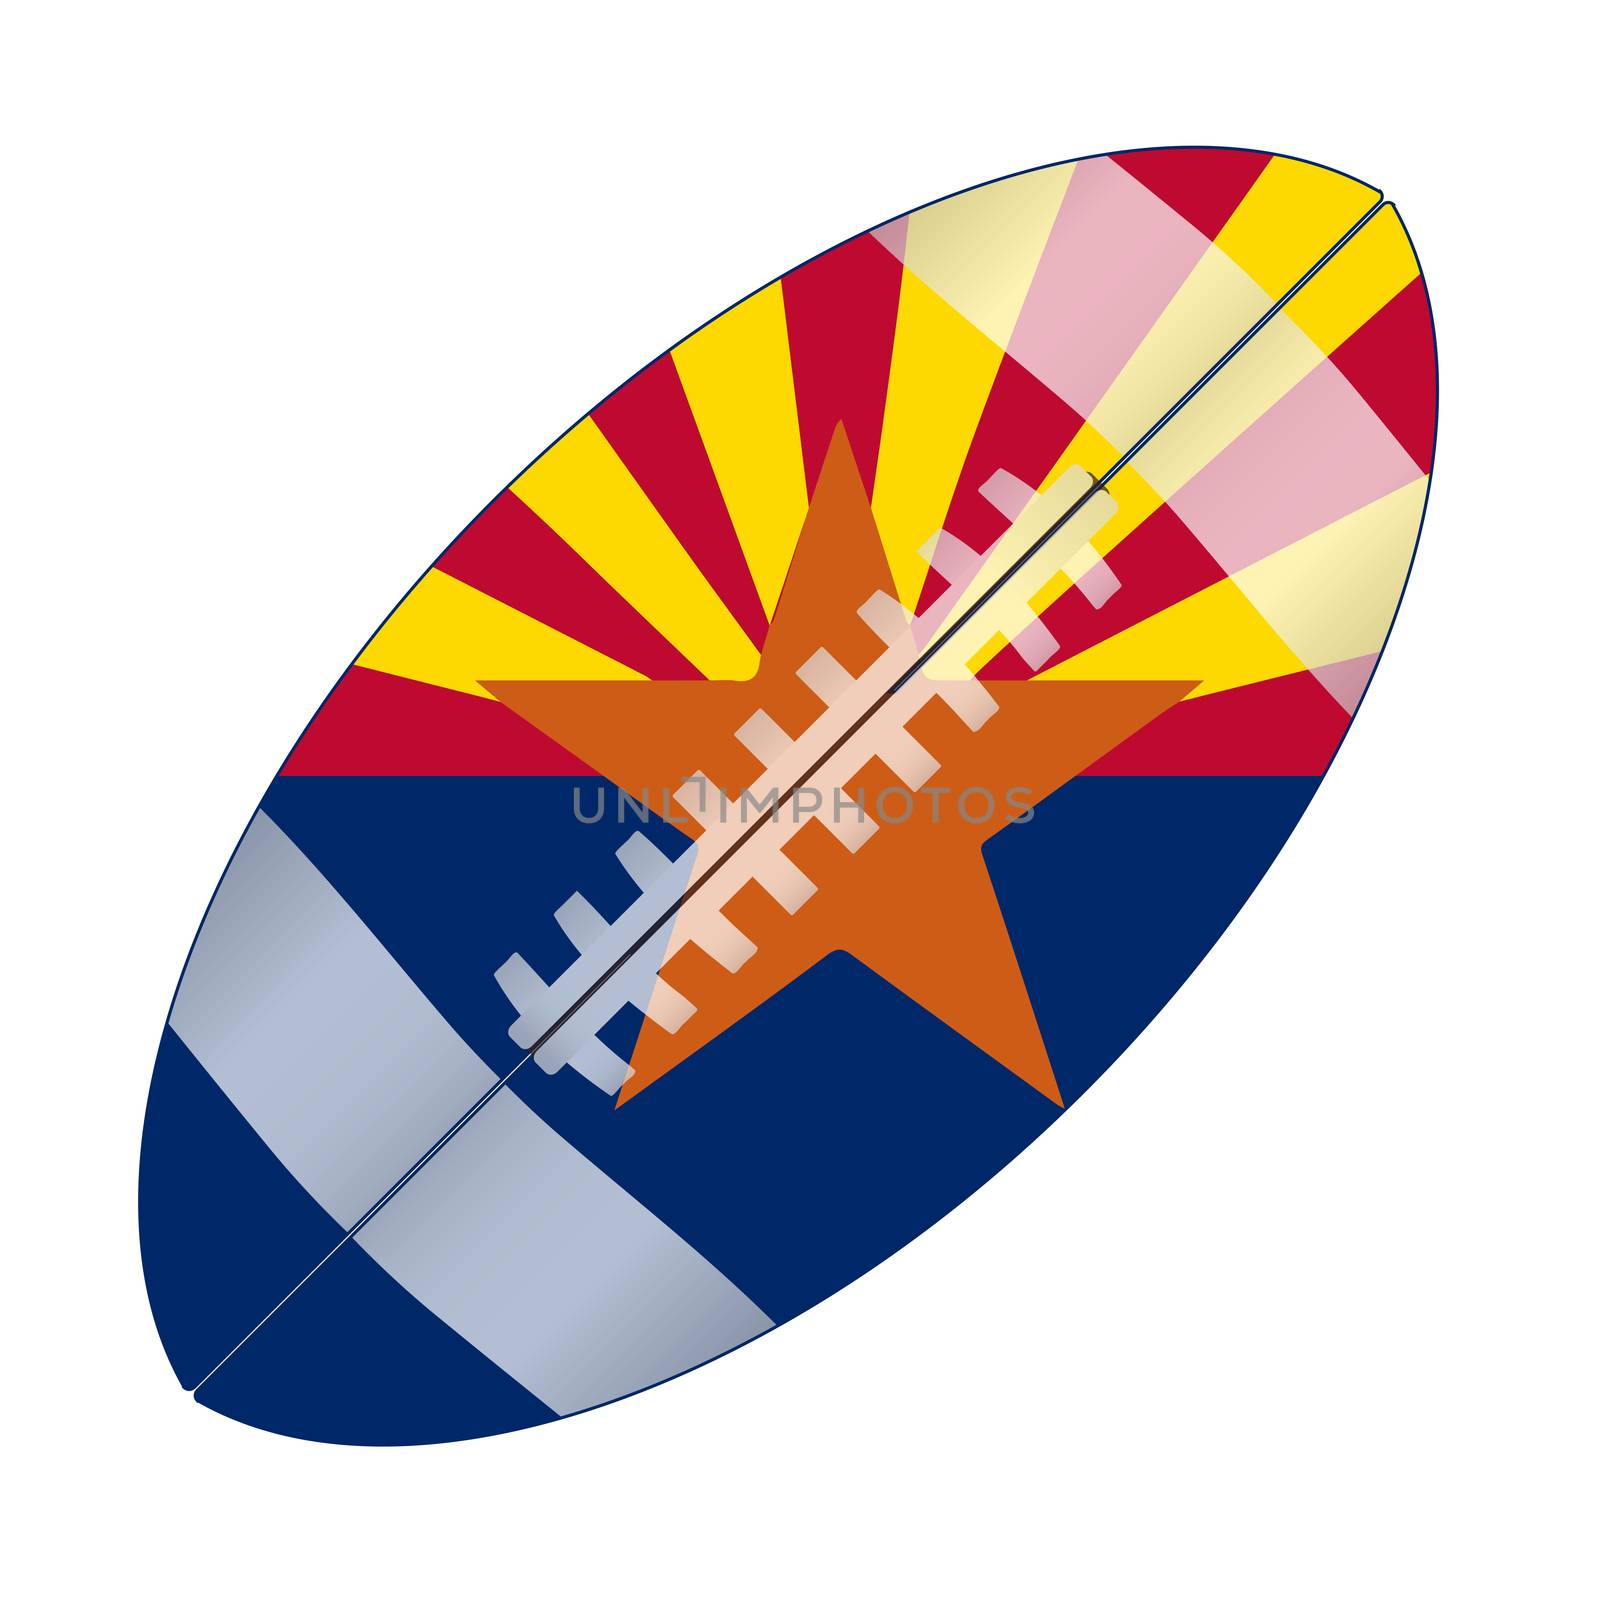 A typical american type foorball over a white background with the flag of Arizona